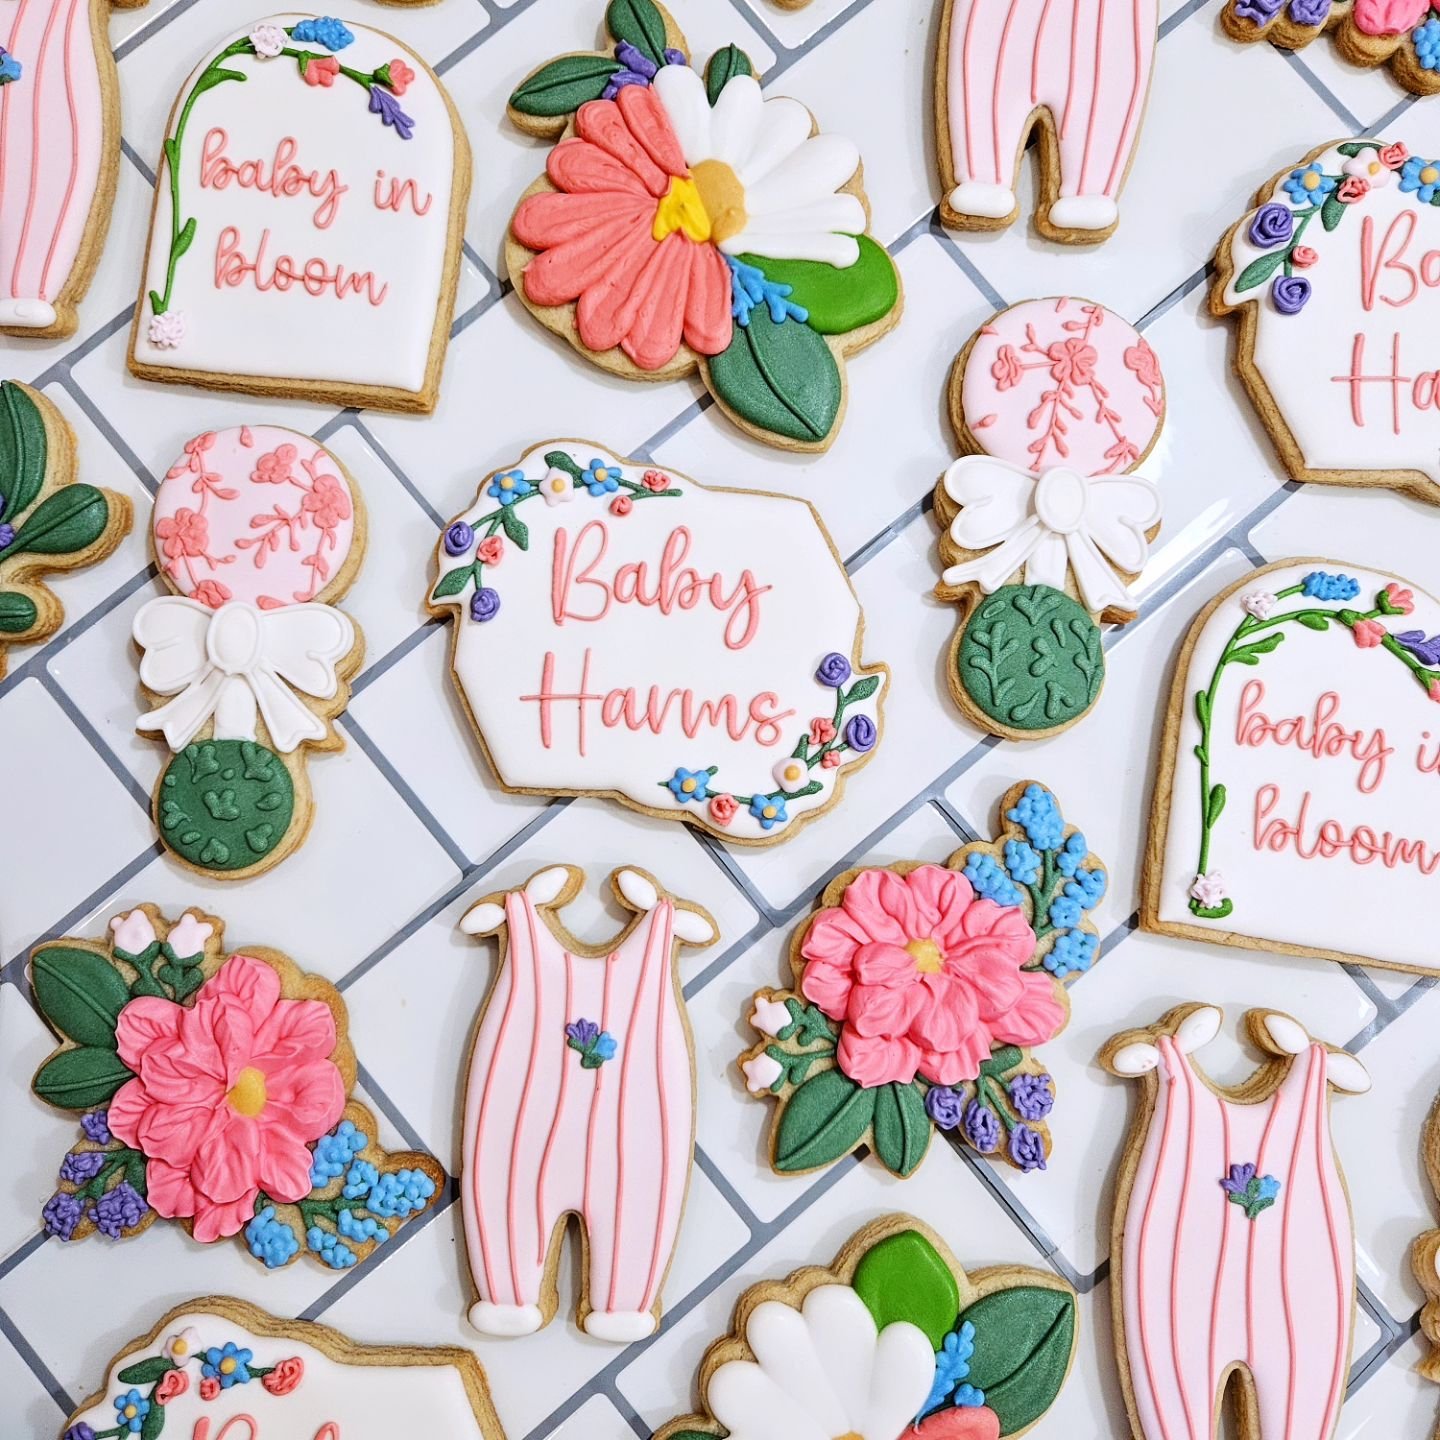 Happy Mother's Day to all the moms 🩷 
.
.
.
#babyinbloom #babyinbloomcookies #babyshowercookies #babygirlcookies #floralcookies #flowercookies #cookies #cookie #cookieart #cookiesofinstagram #cookiestagram #cookiedecorating #sugarcookiemarketing #su